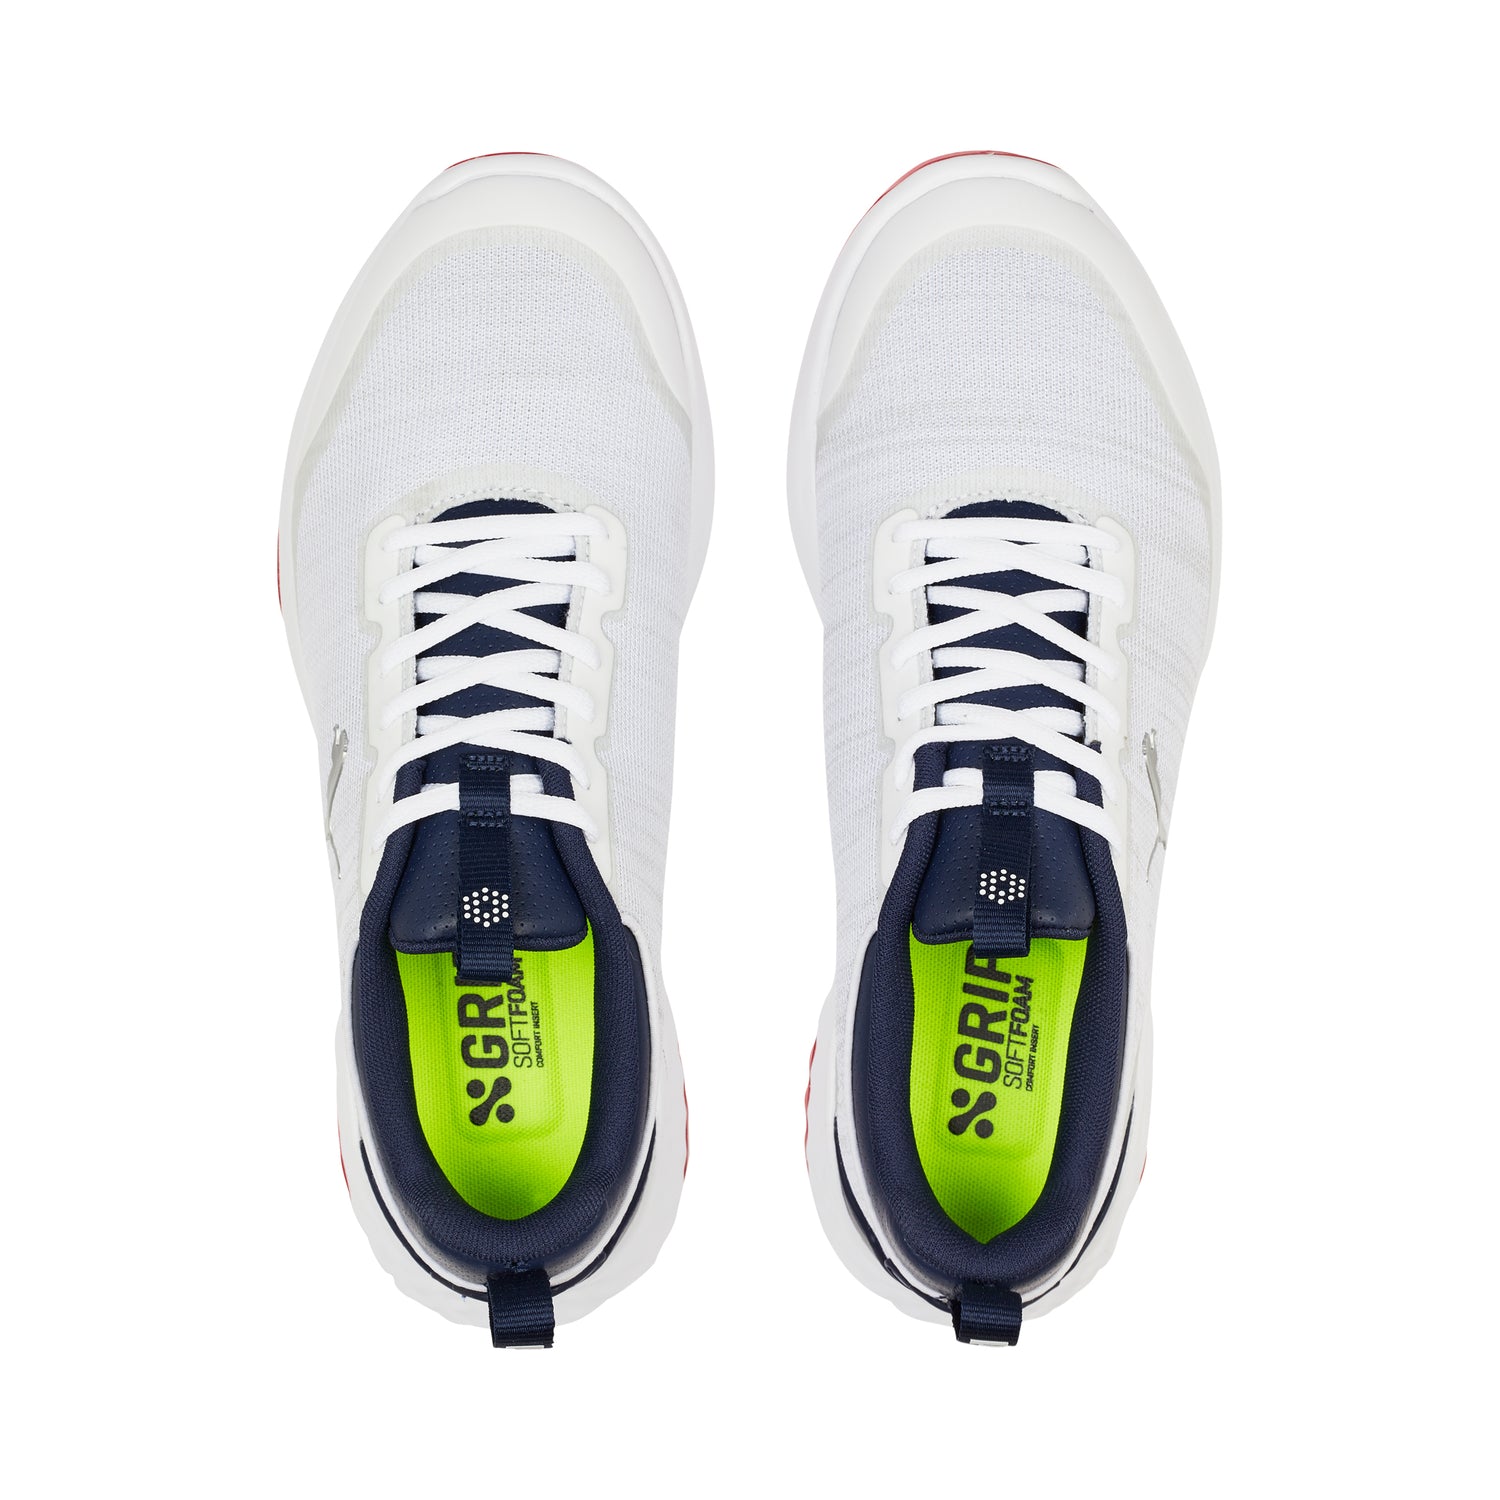 Puma White / Puma Navy / For All Time Red